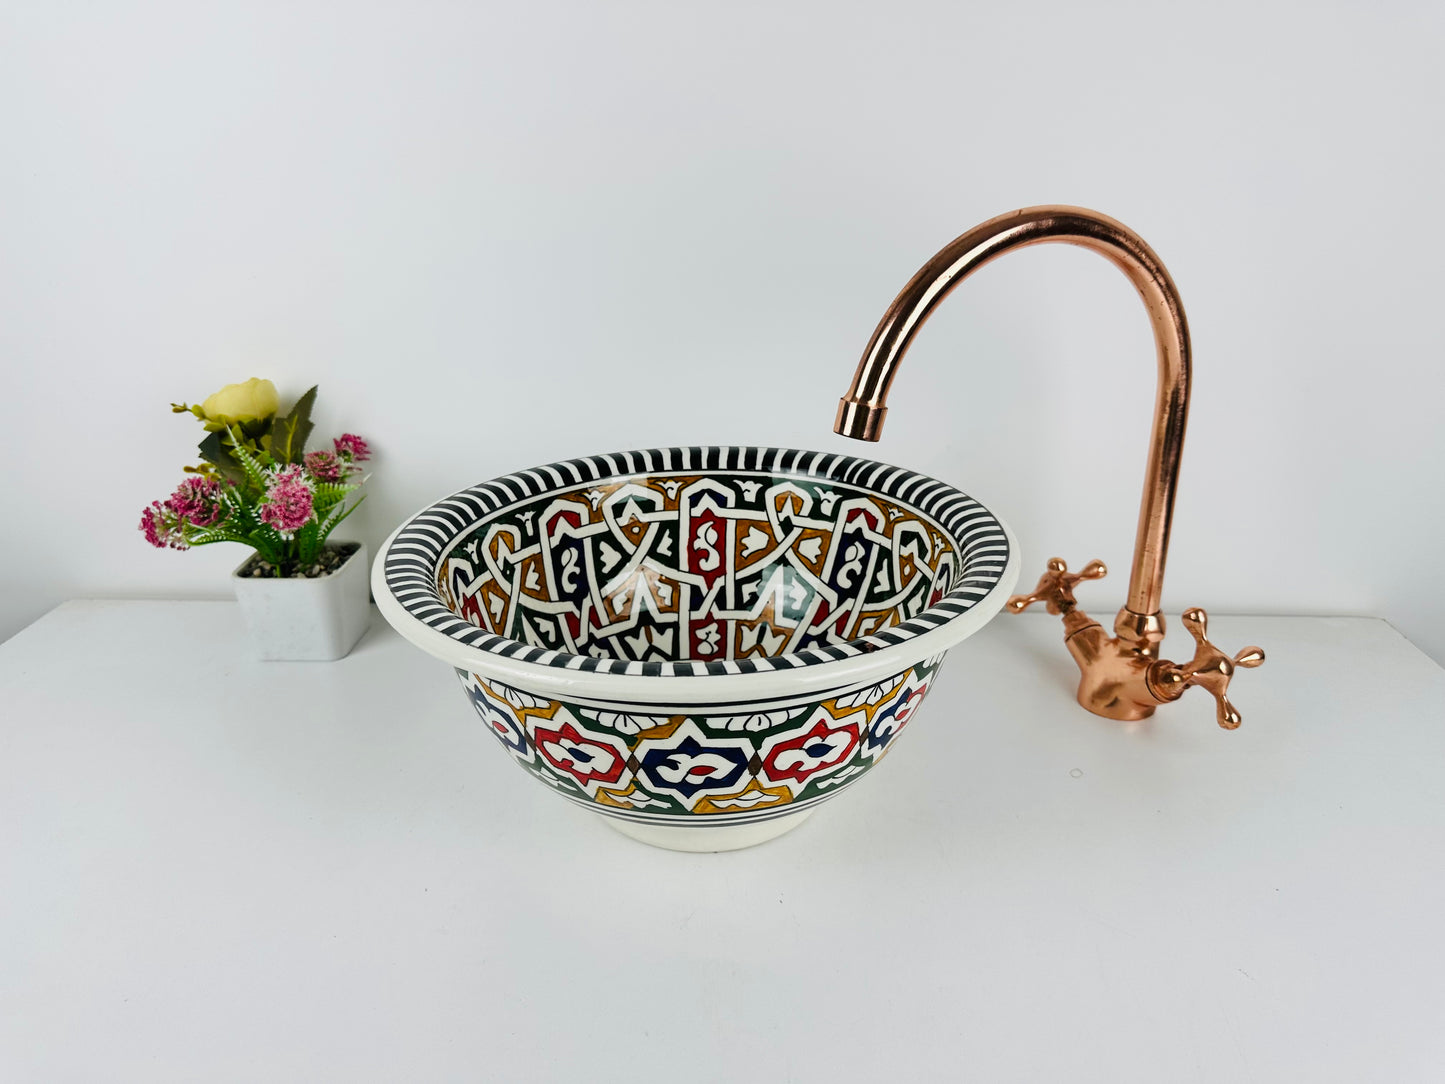 Vibrant Souk: Handcrafted Ceramic Sink with Moroccan-Inspired Color Palette